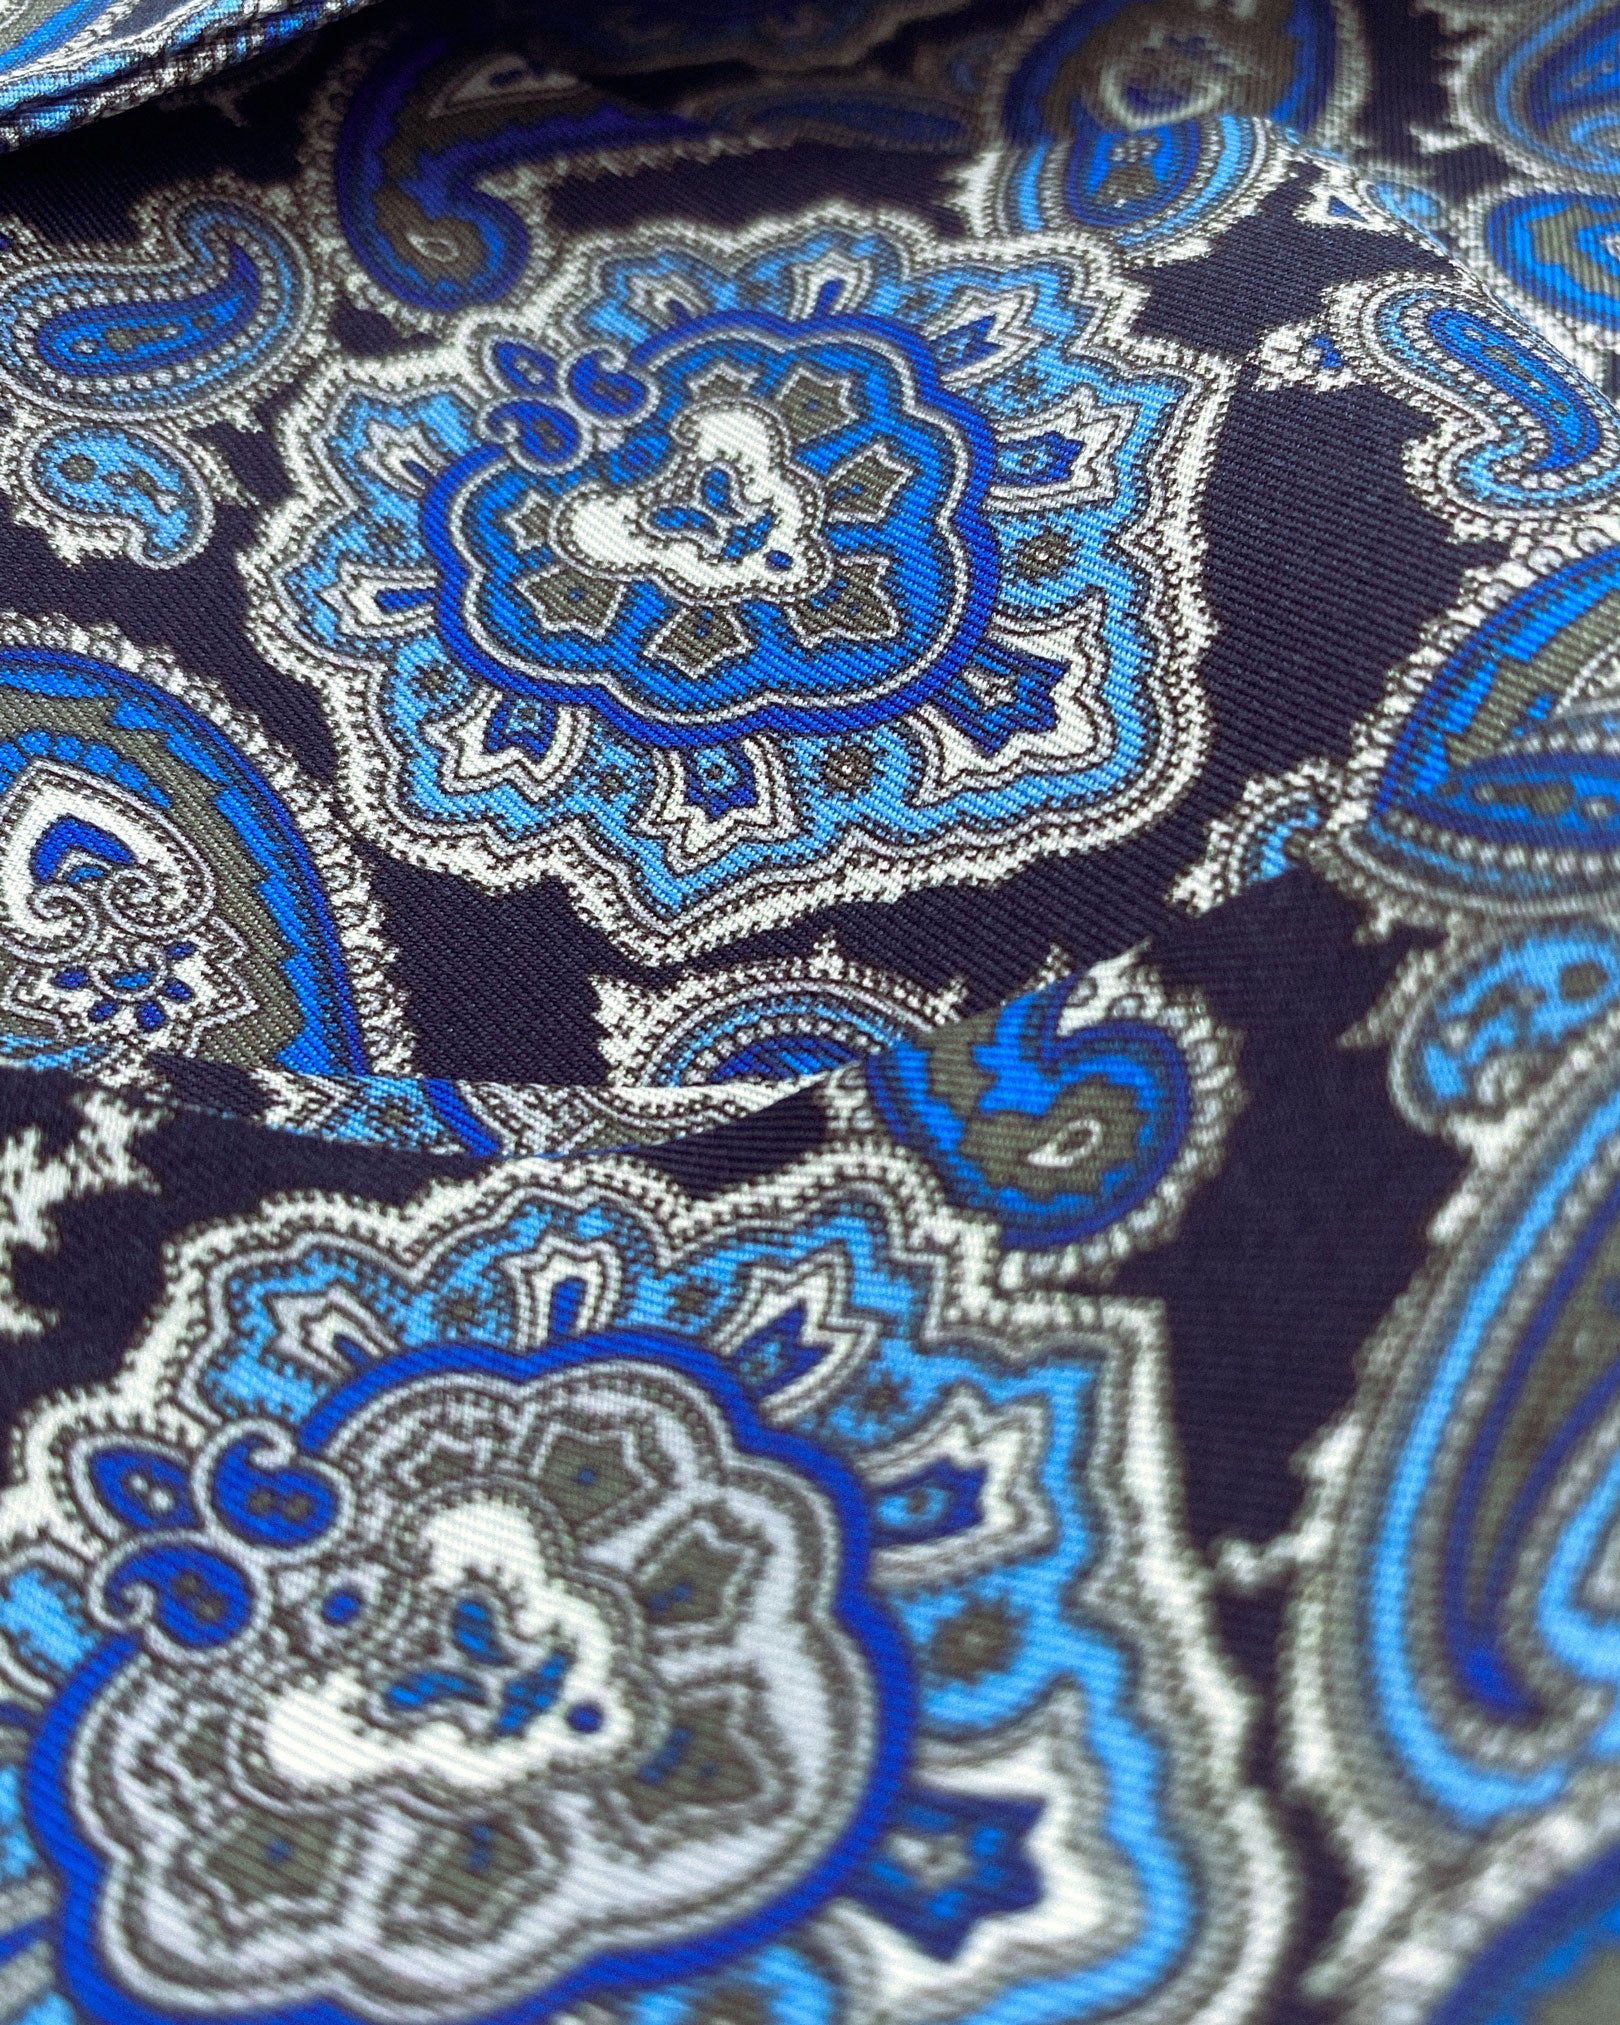 Ruffled close-up view of the Dezon silk aviator scarf, presenting a closer view of the blue paisley patterns on a dark blue background.